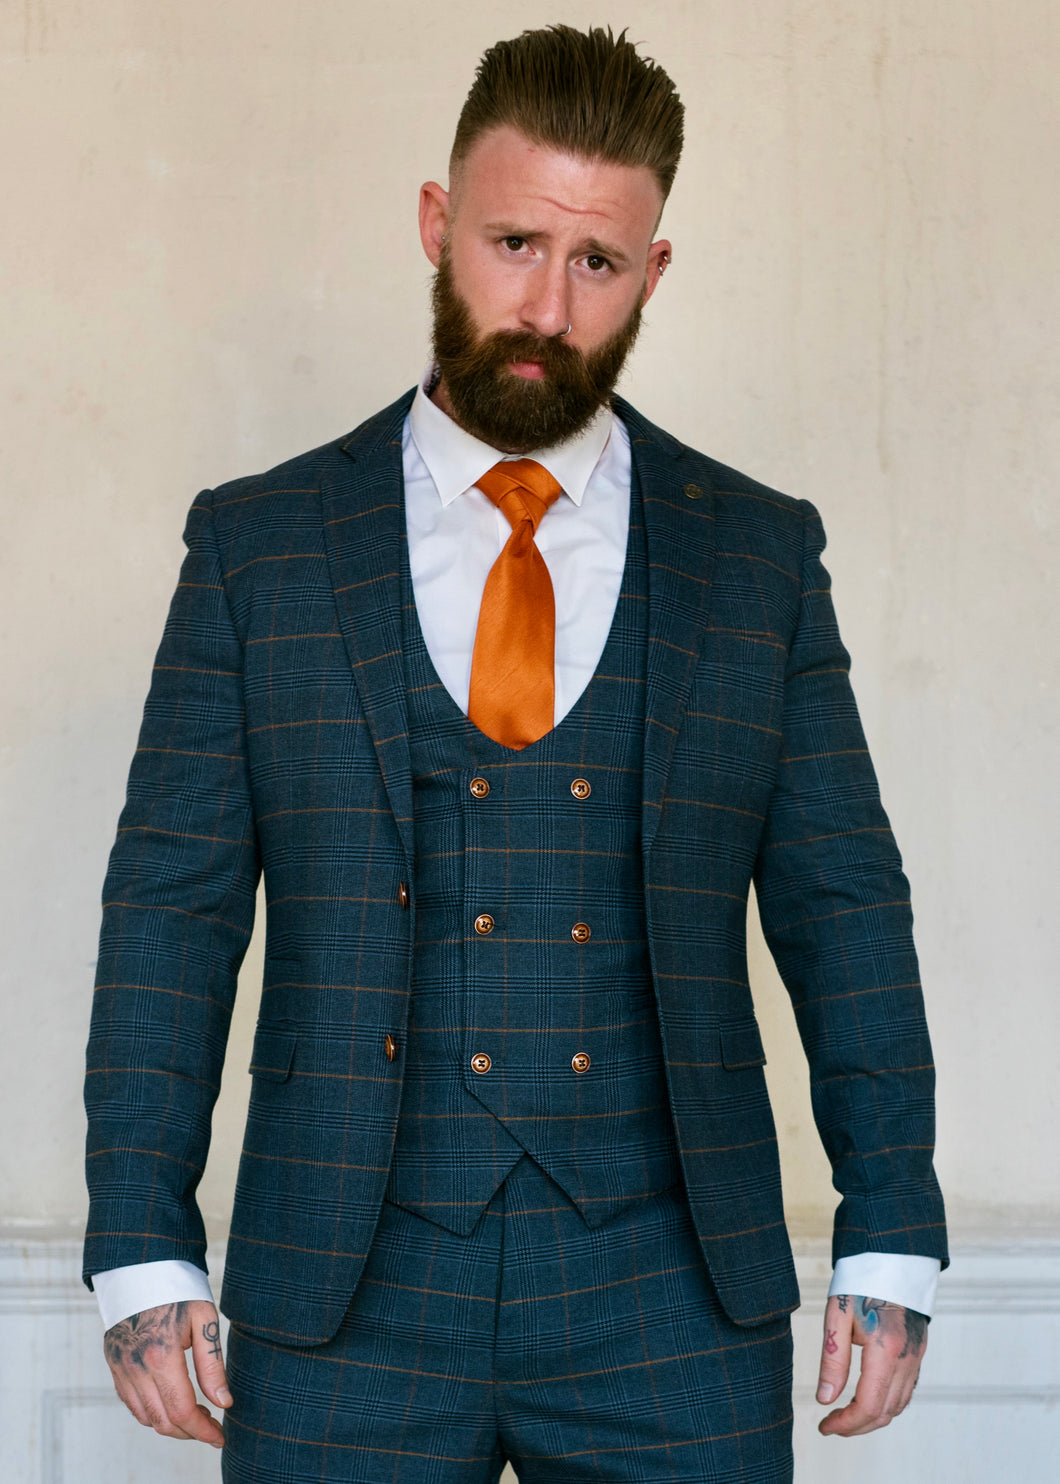 Marc Darcy Jenson Marine Checked Jacket & Waistcoat with a white shirt and Elredge knotted tie in orange colour